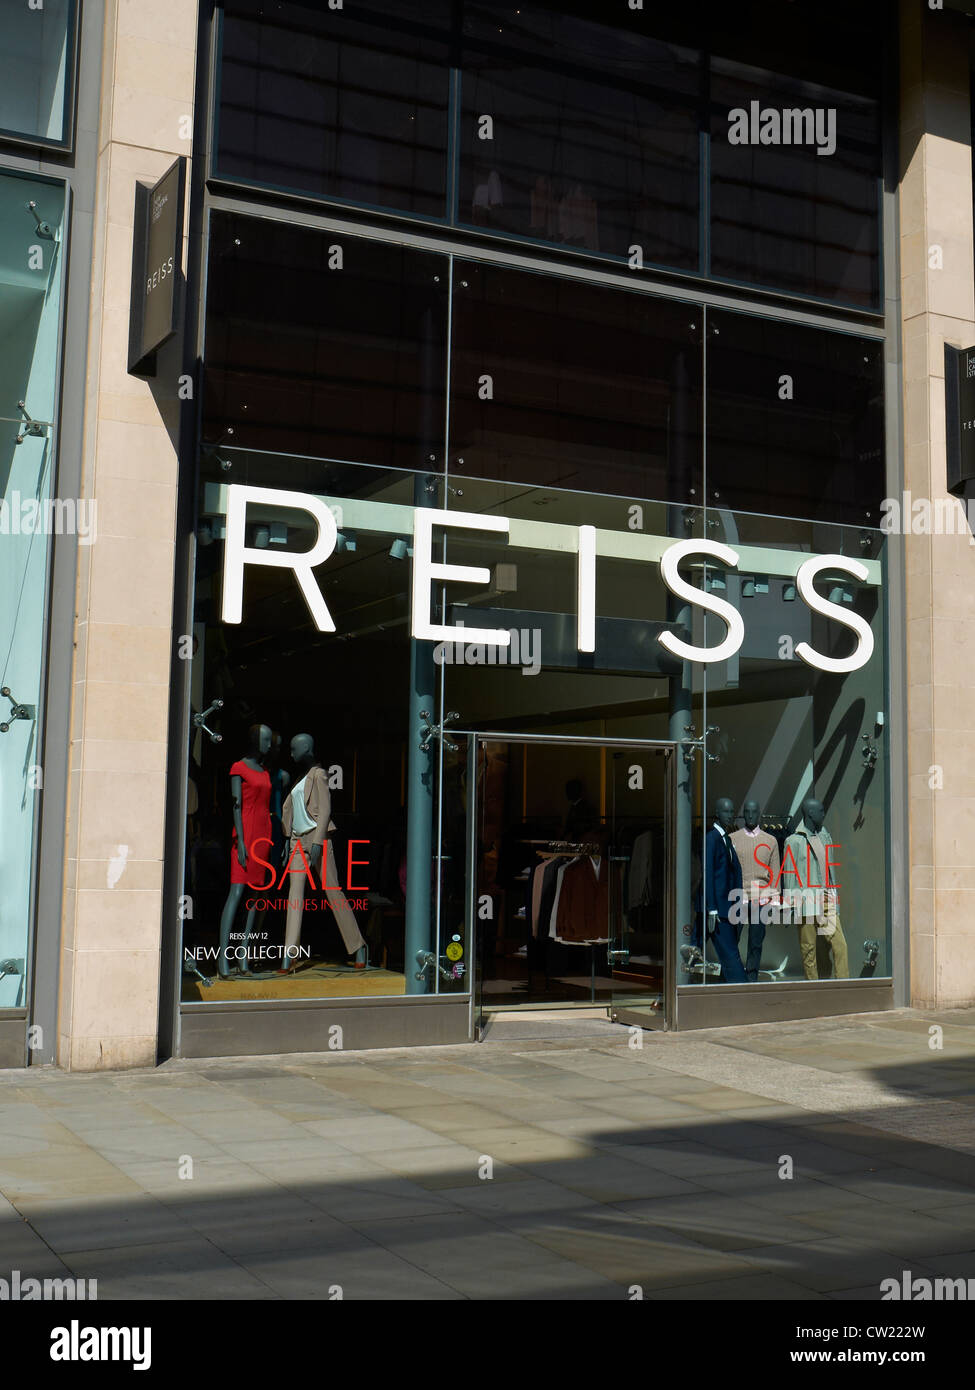 Reiss store in New Cathedral street in Manchester UK Stock Photo